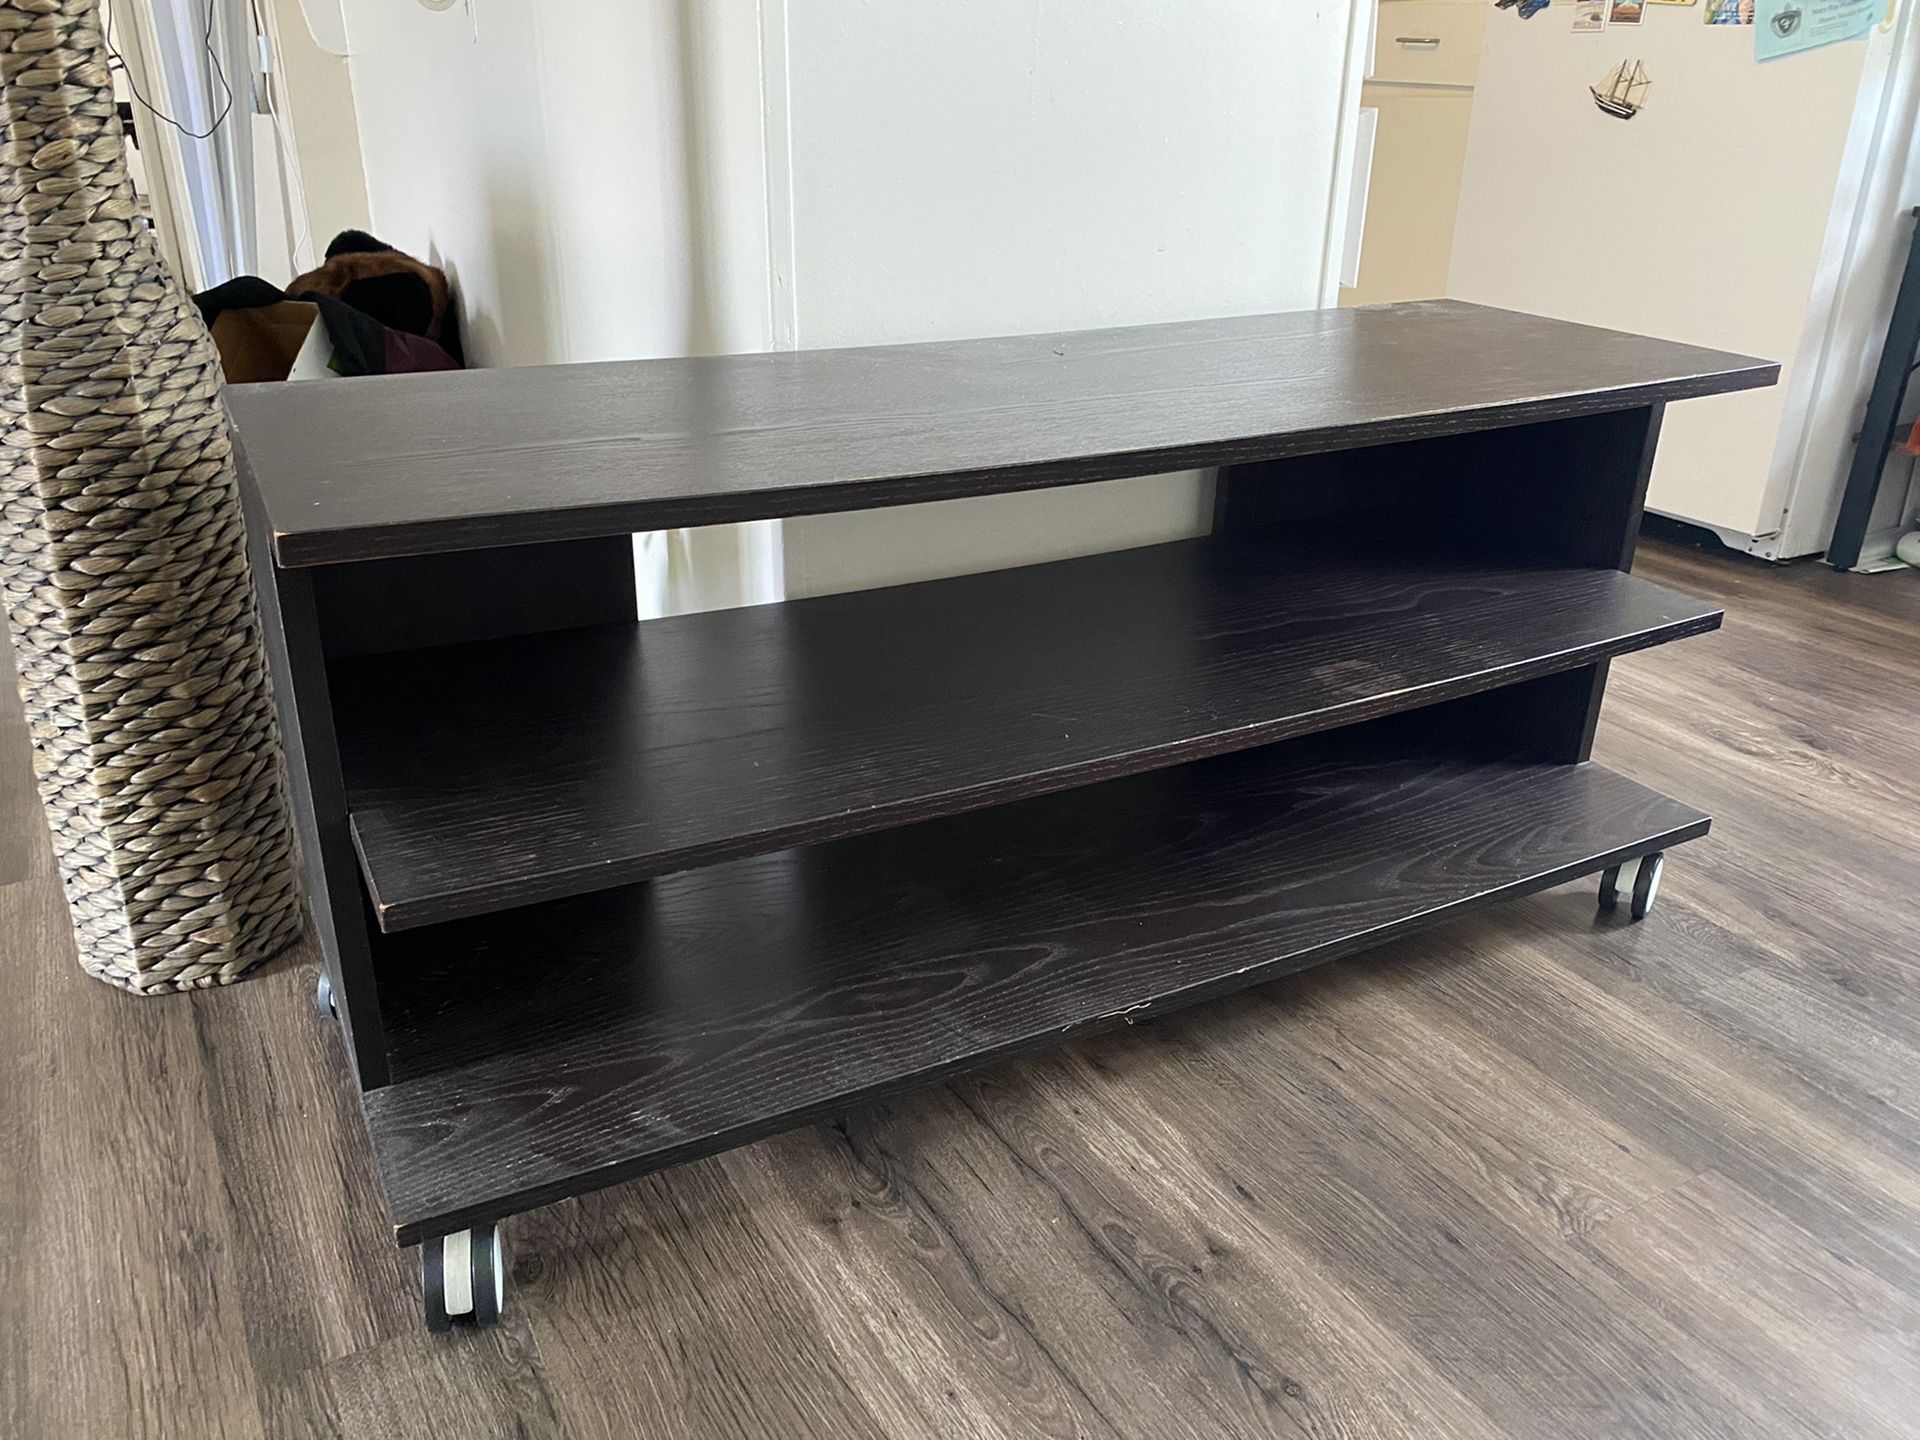 3 shelve stand /tv stand / or shoe rack with wheels